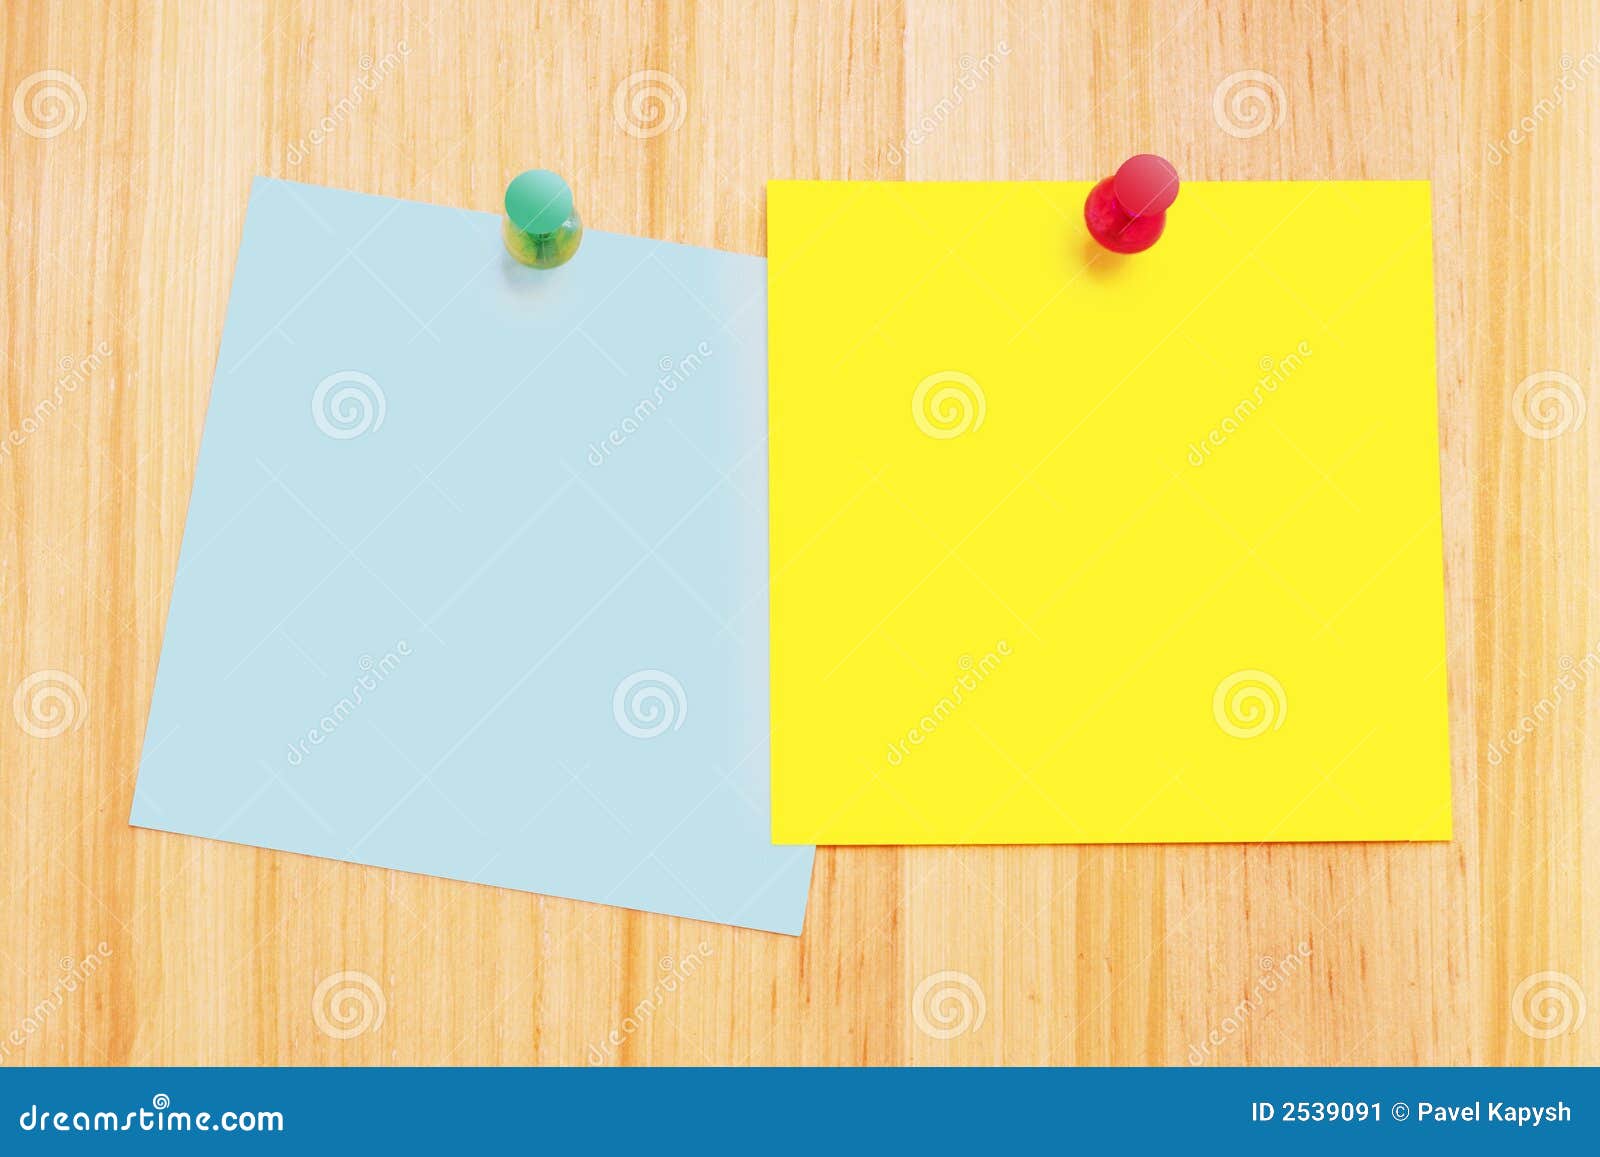 Pair of clean post-it notes on a wood background with push pins.